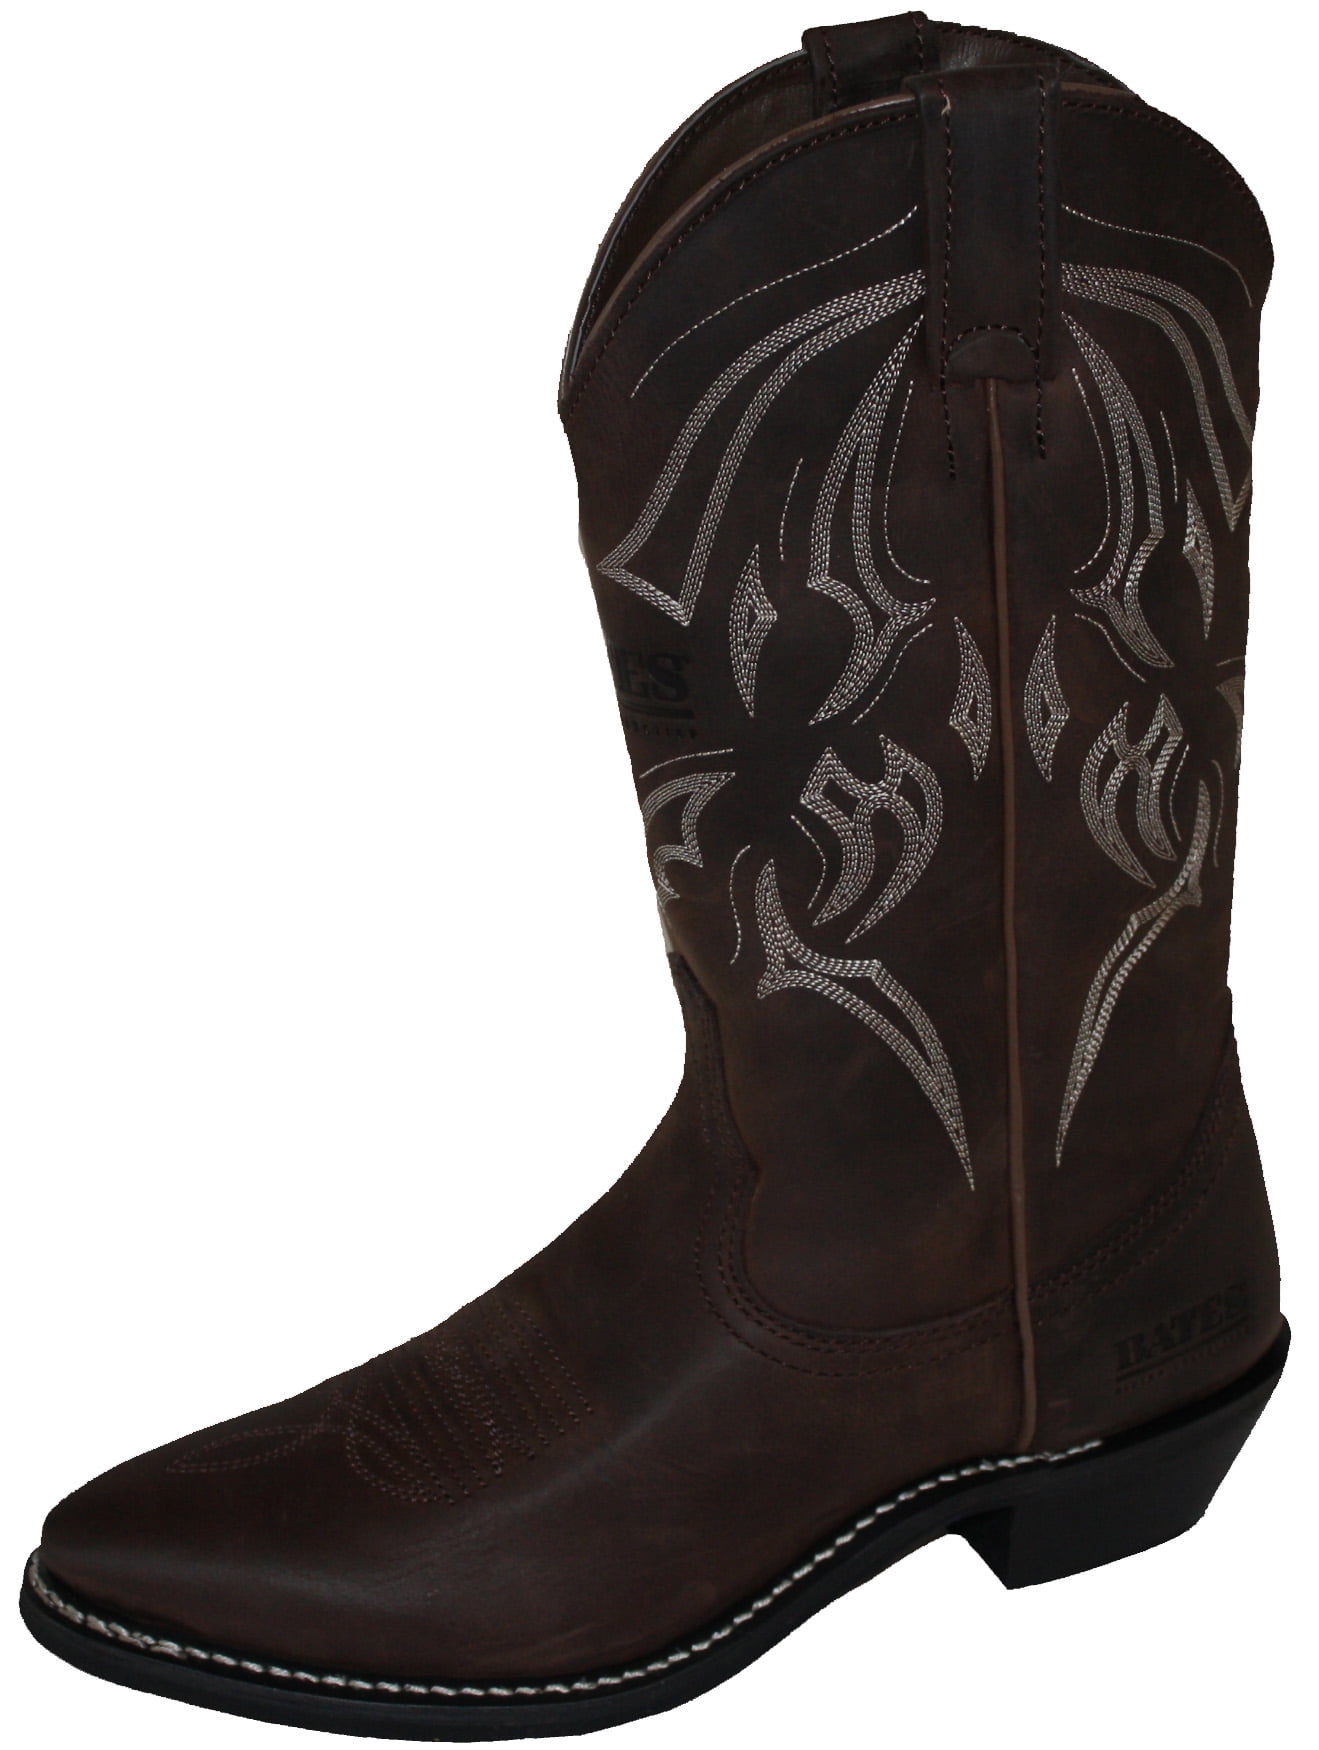 cowboy style motorcycle boots